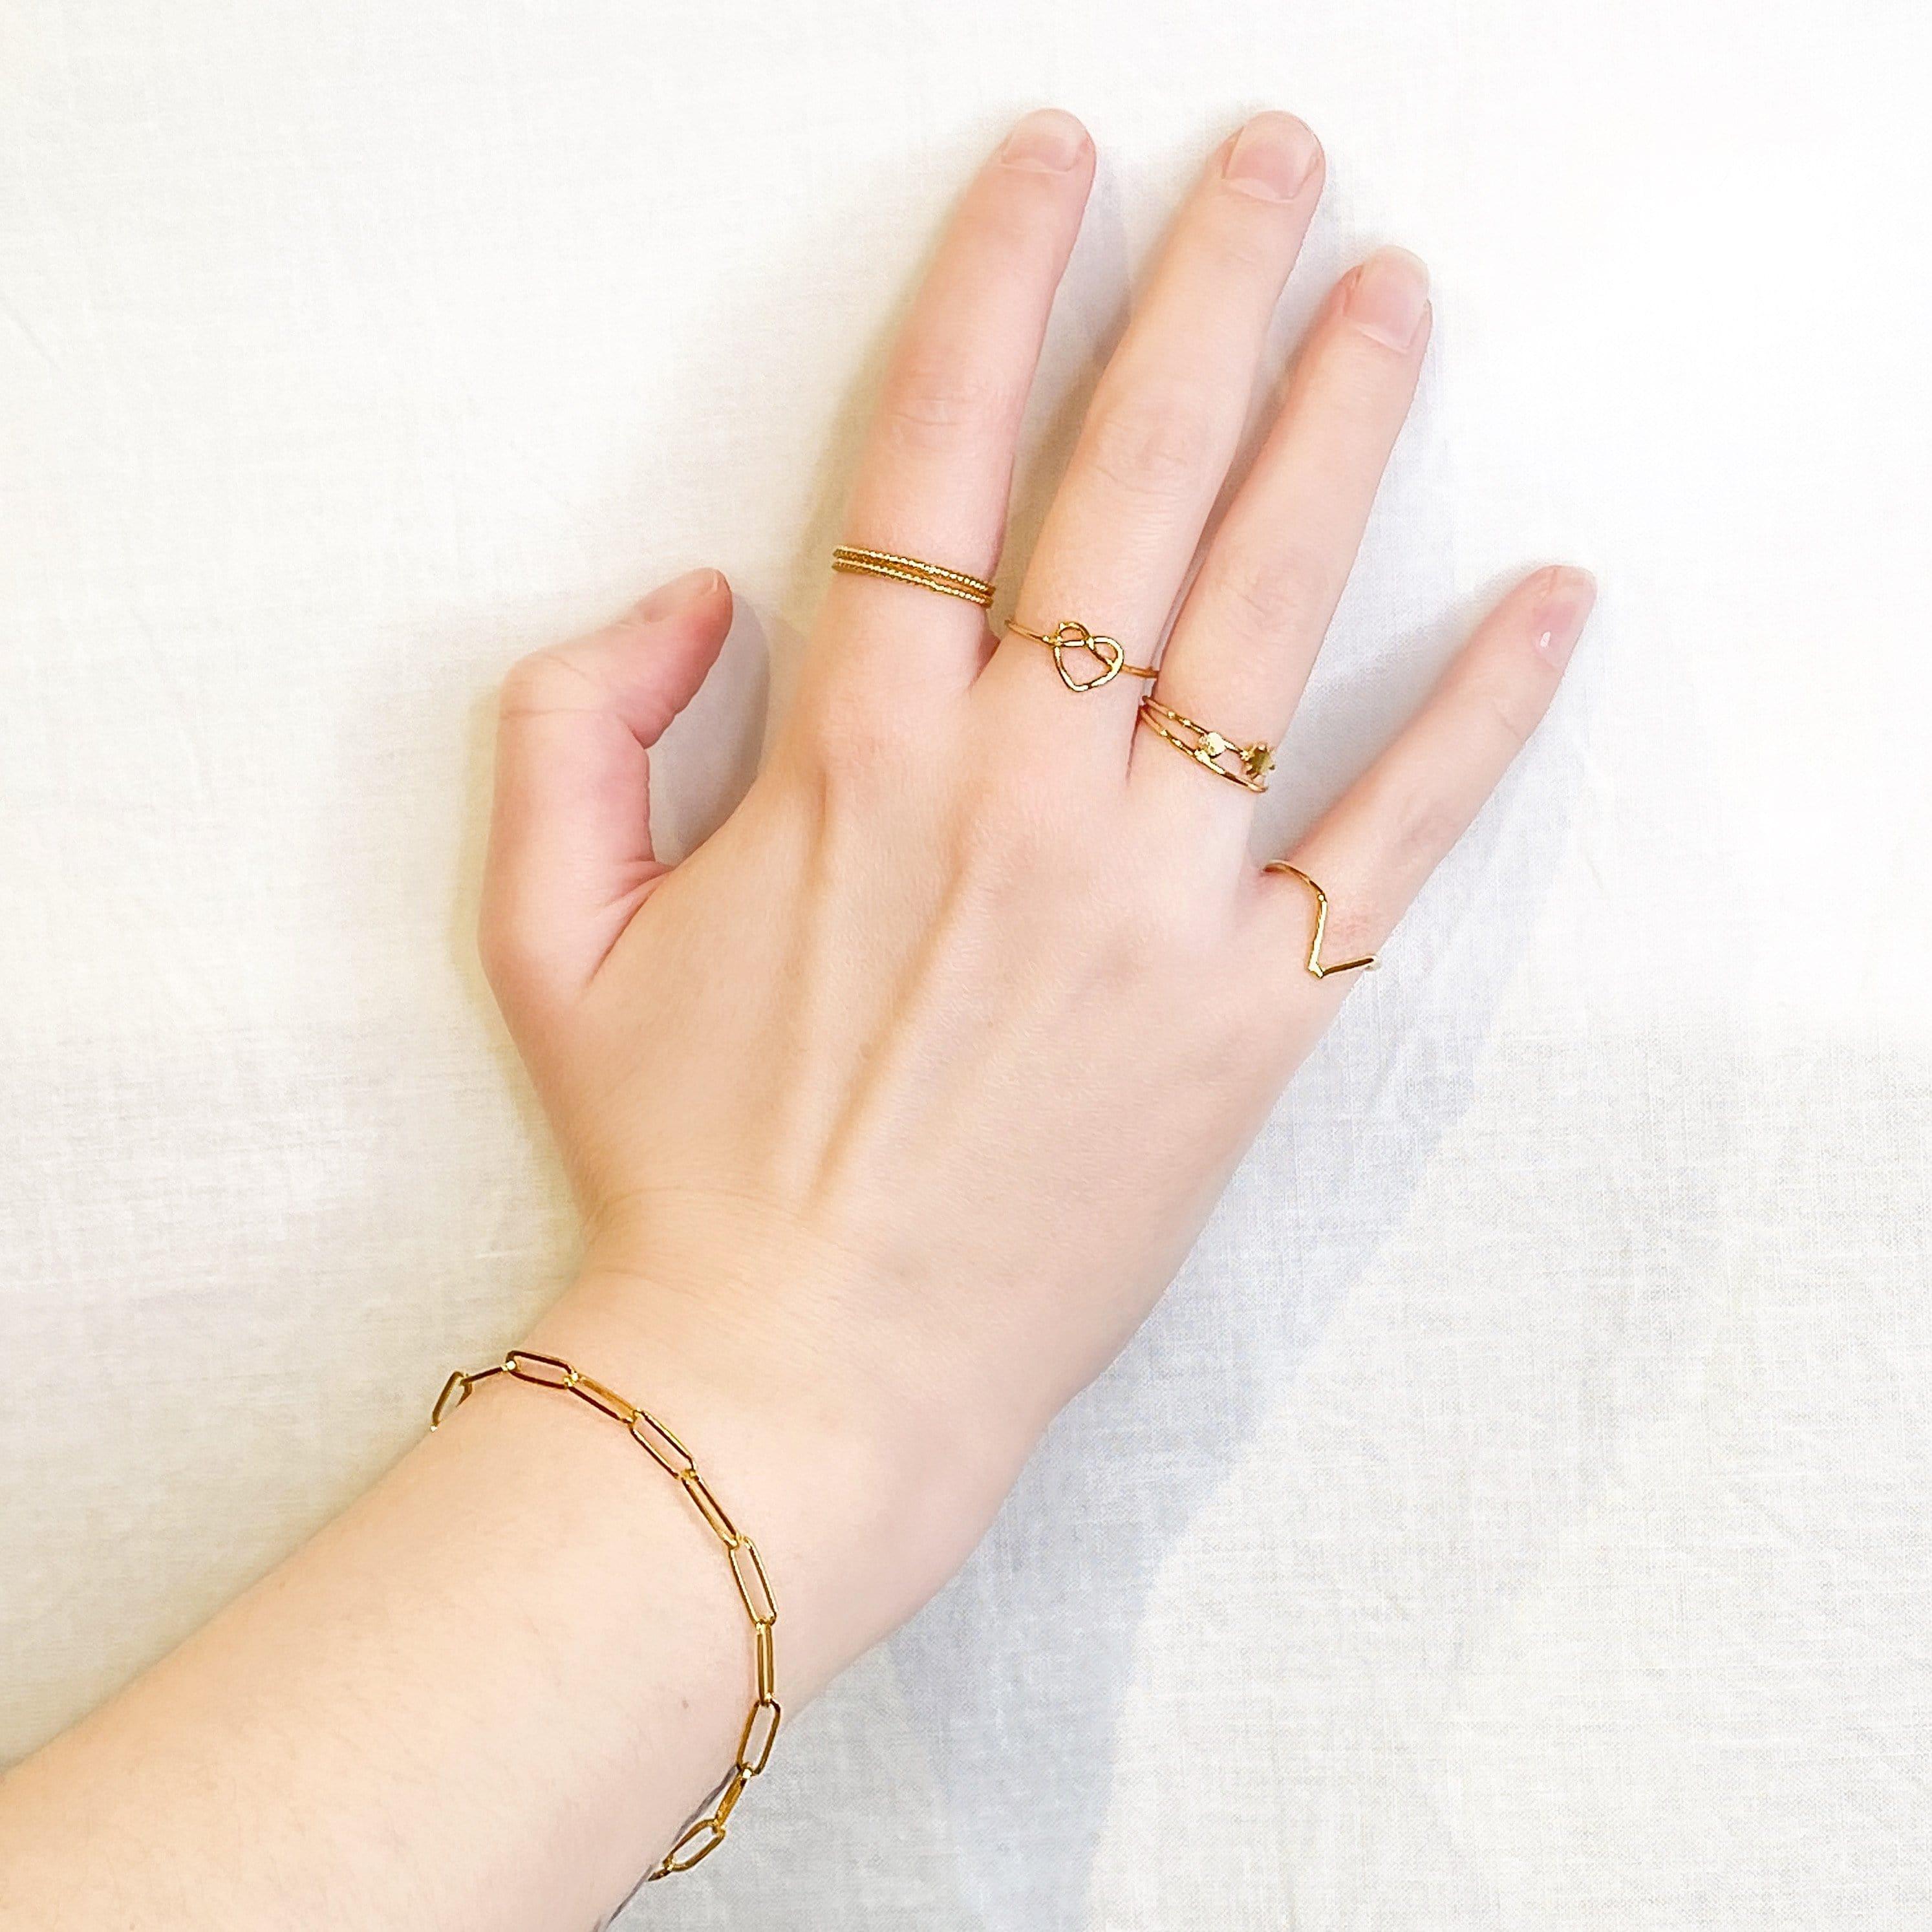 gold plated braided heart ring on hand model